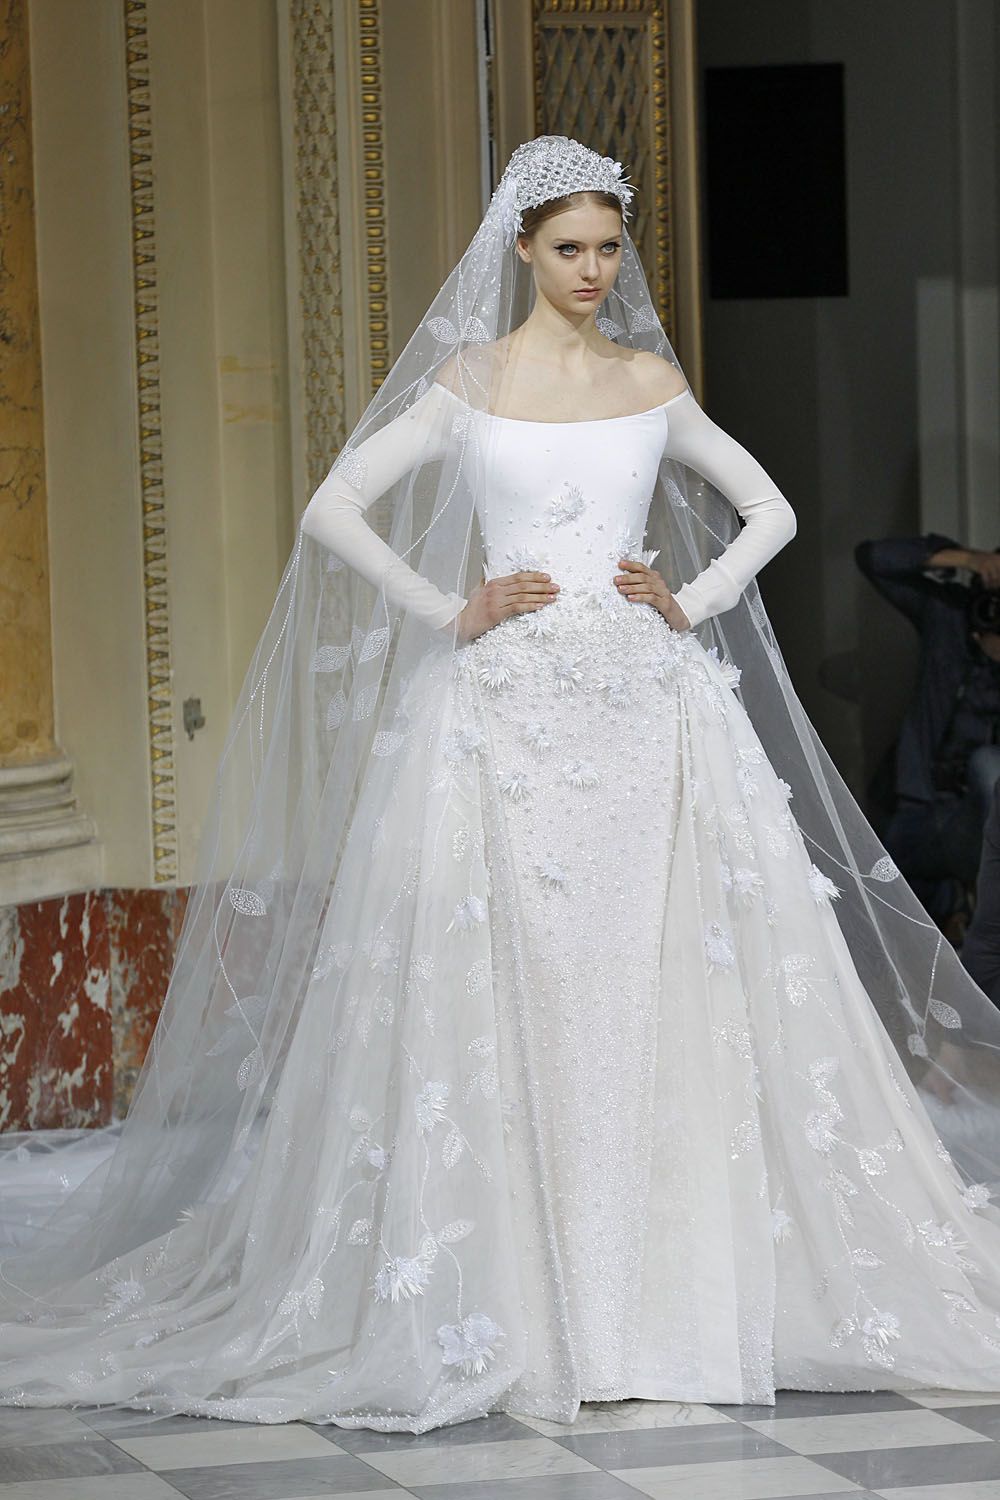 45 Fantasy Wedding Dresses That Will Make Your Heart Stop